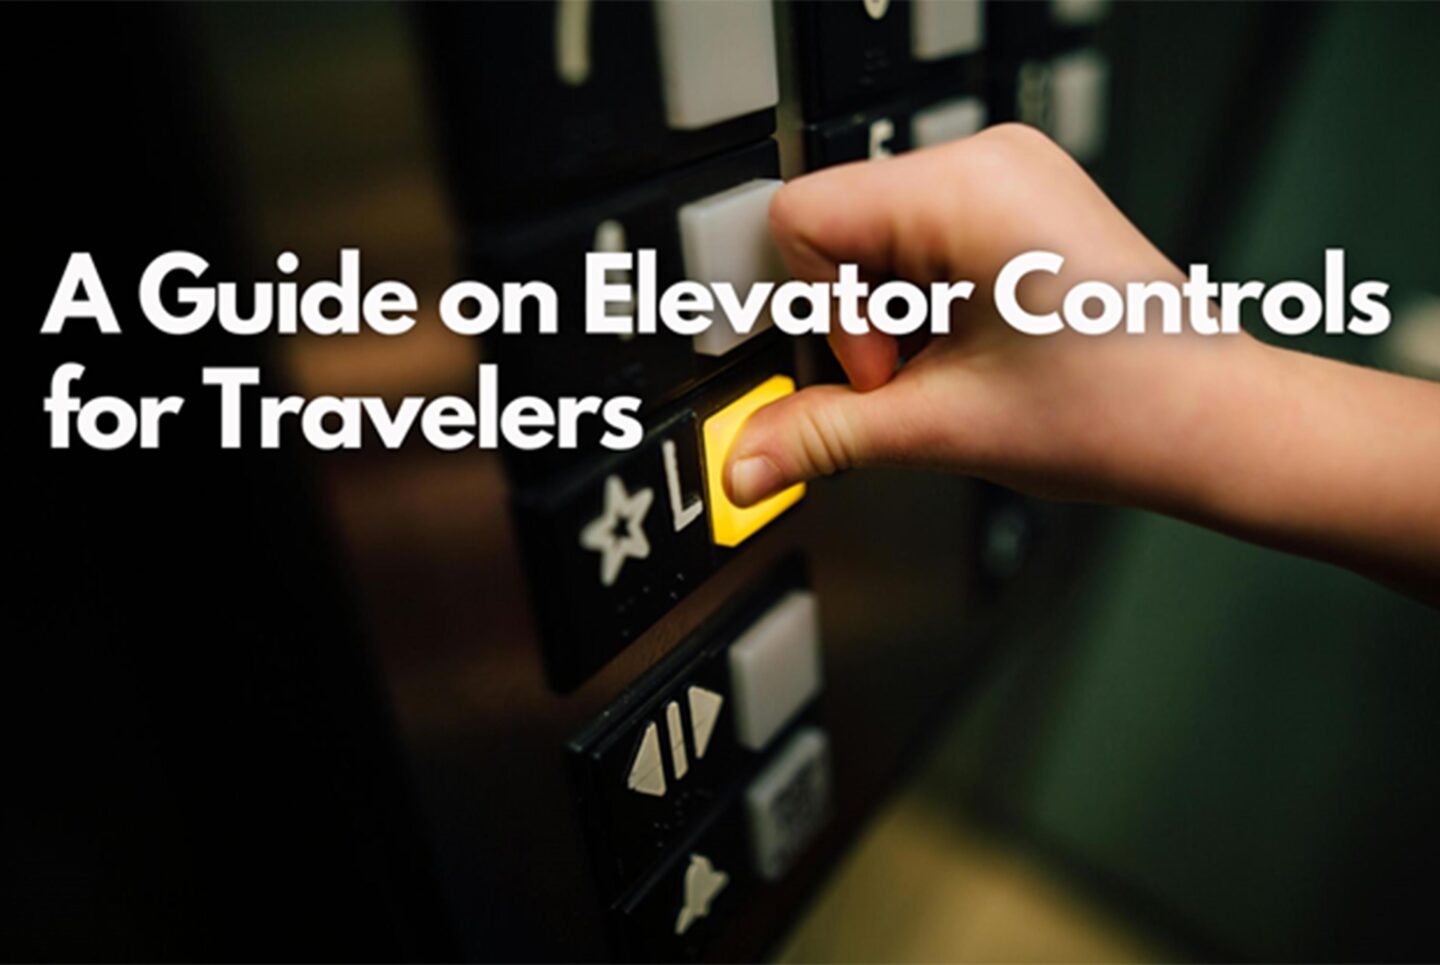 Guide on Elevator Controls for Travelers